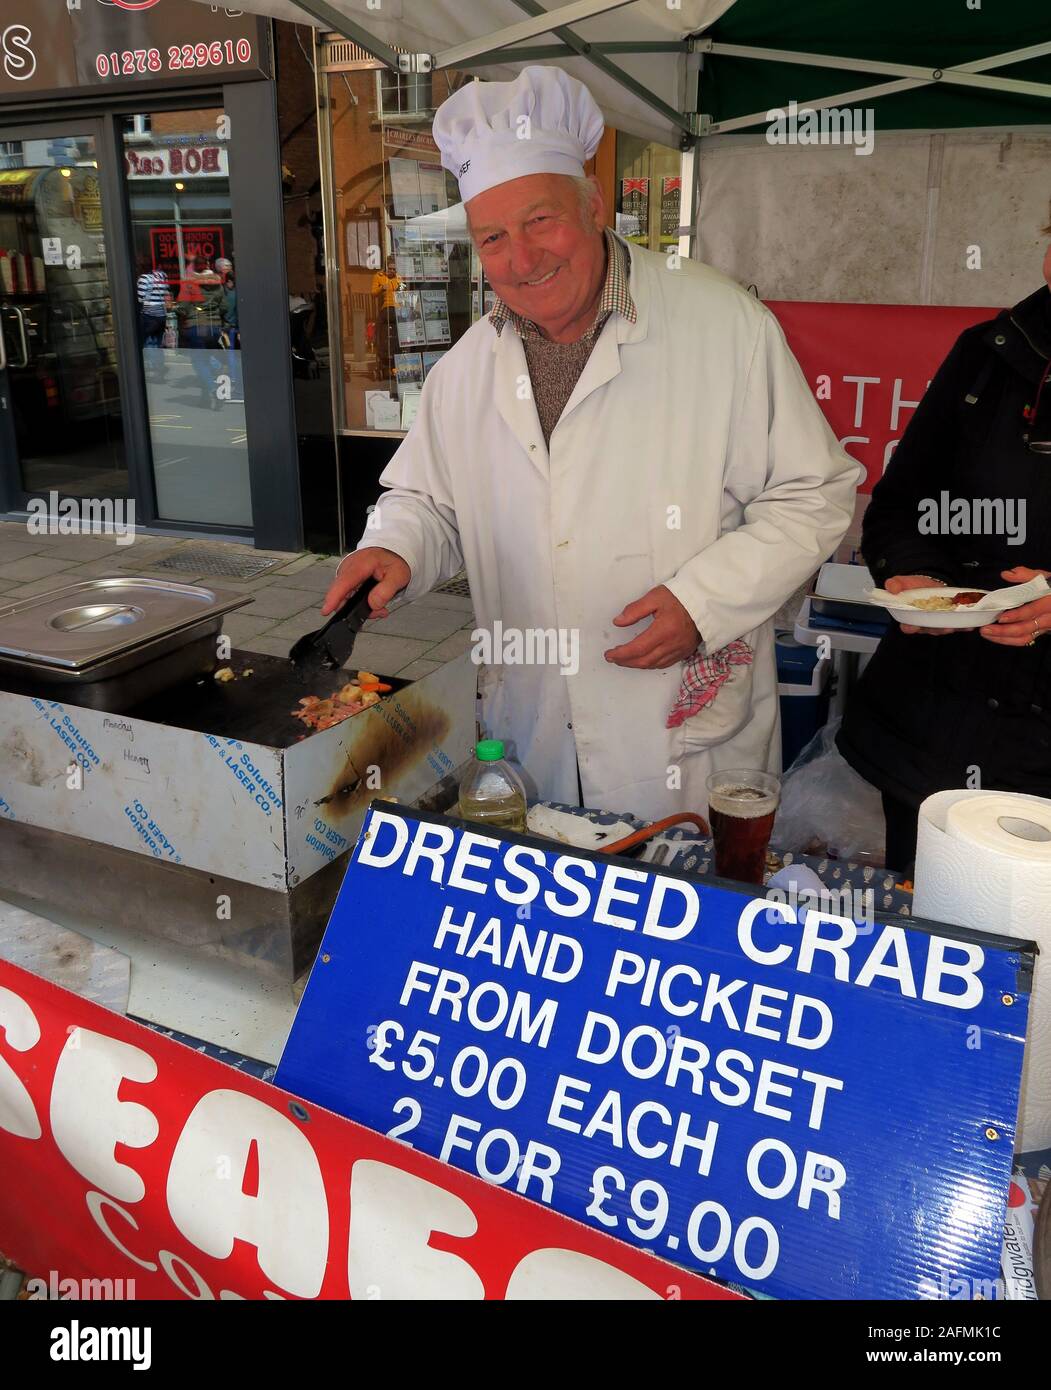 The dressed crab man, DRESSED CRAB,hand picked,from Dorset,£5 each,or 2 for £9, selling at Bridgwater food and drink festival, TA6 Stock Photo